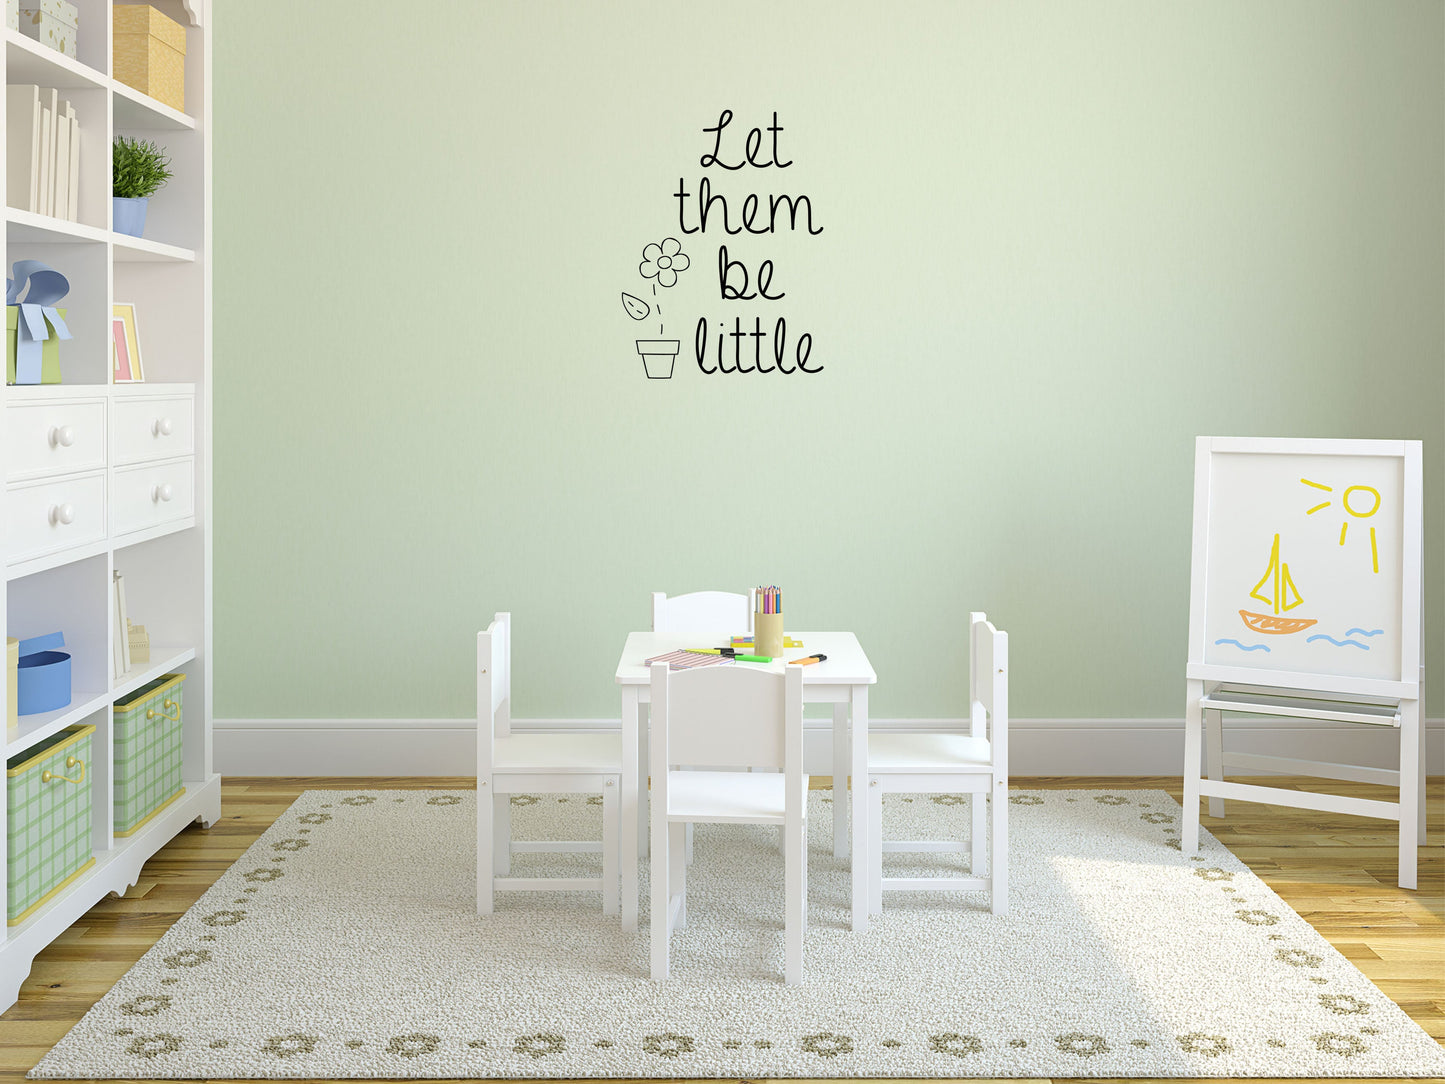 Let Them Be Little - Inspirational Wall Decals Vinyl Wall Decal Inspirational Wall Signs 